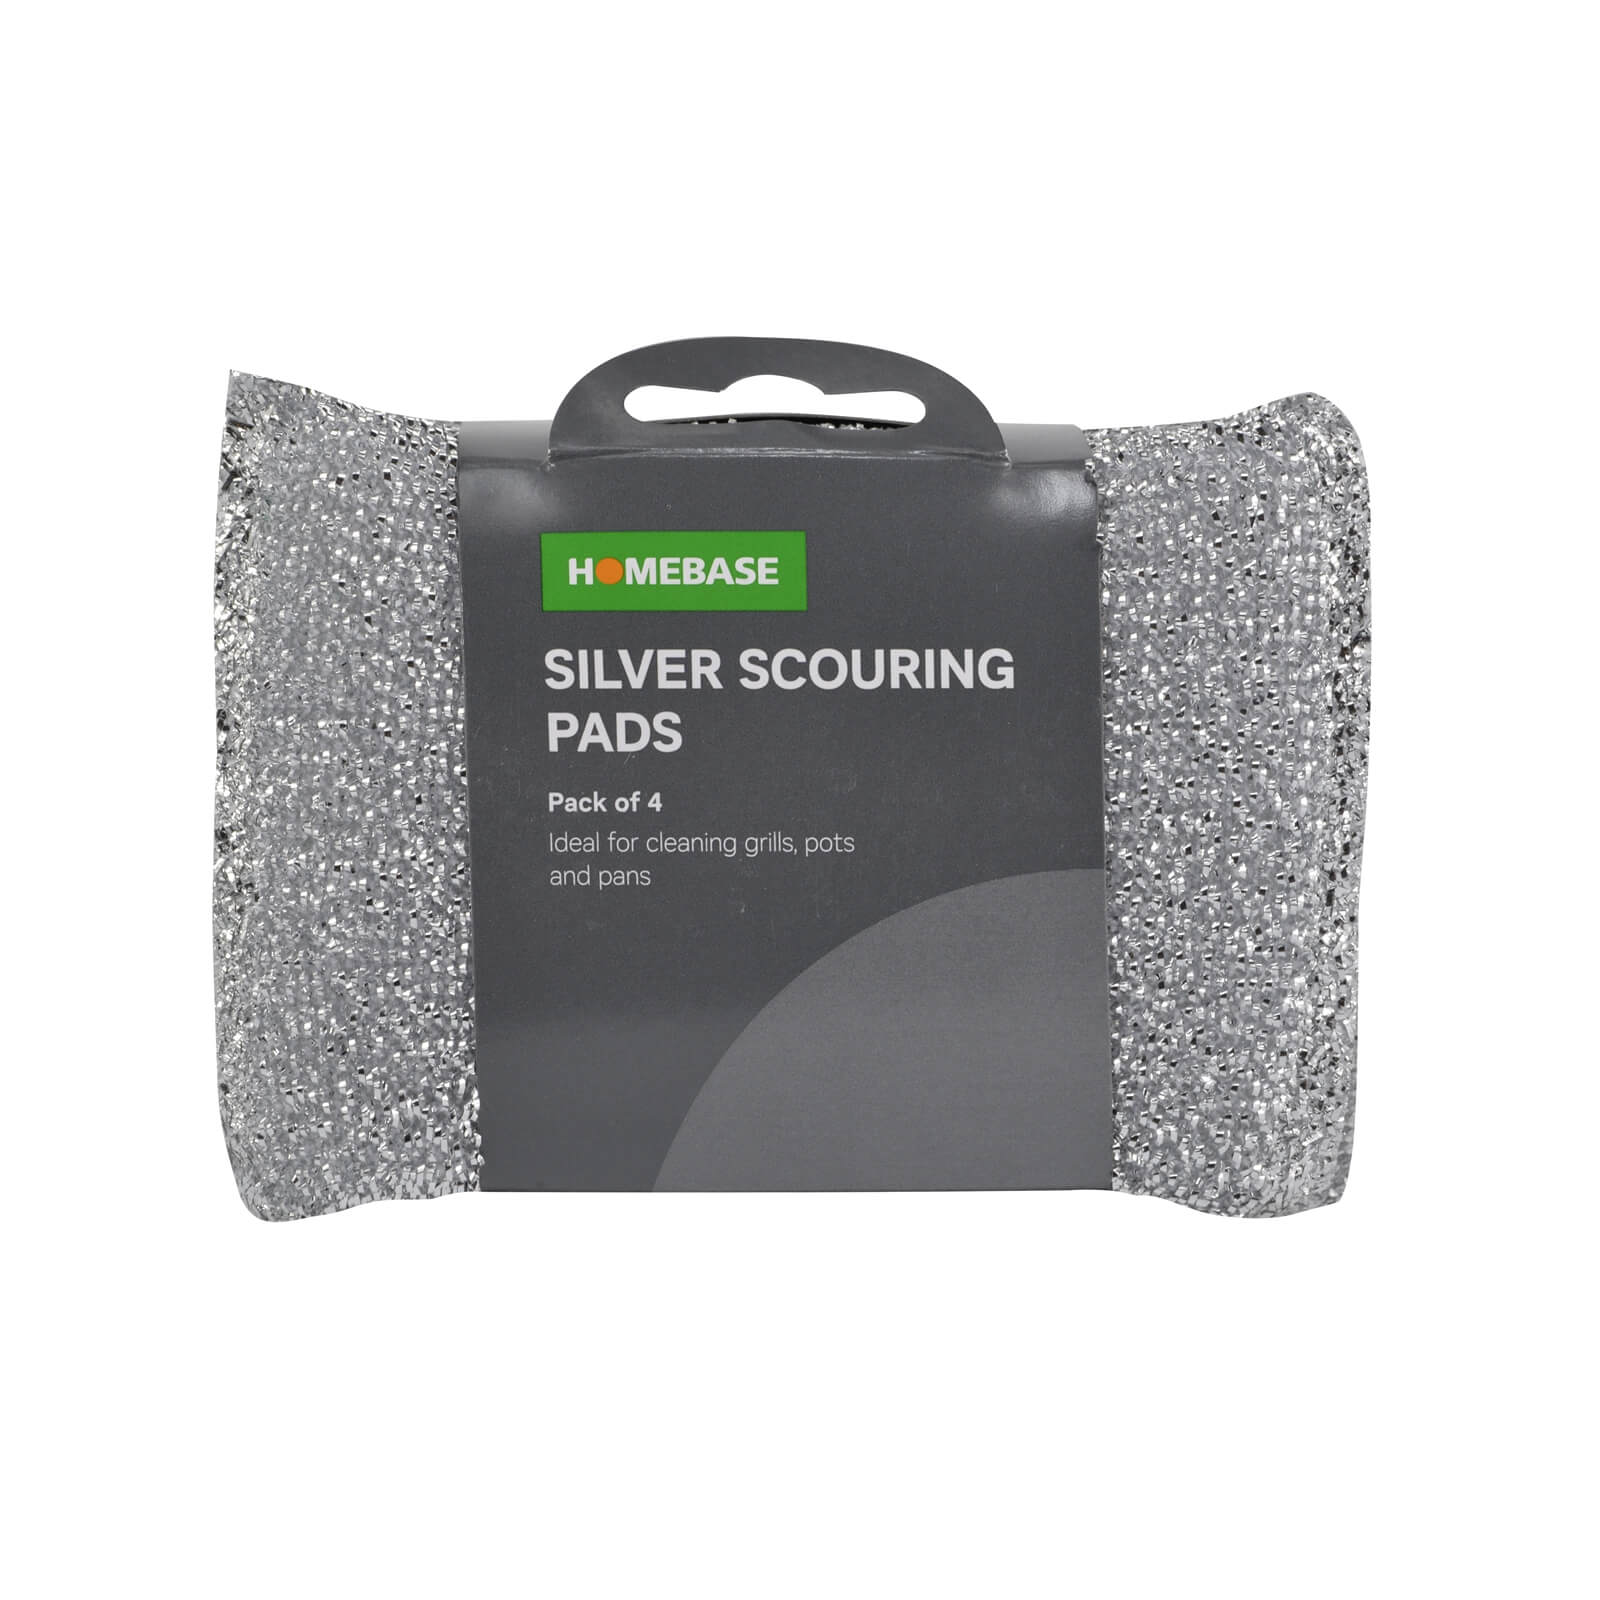 4 pack of Silver Scouring Pads